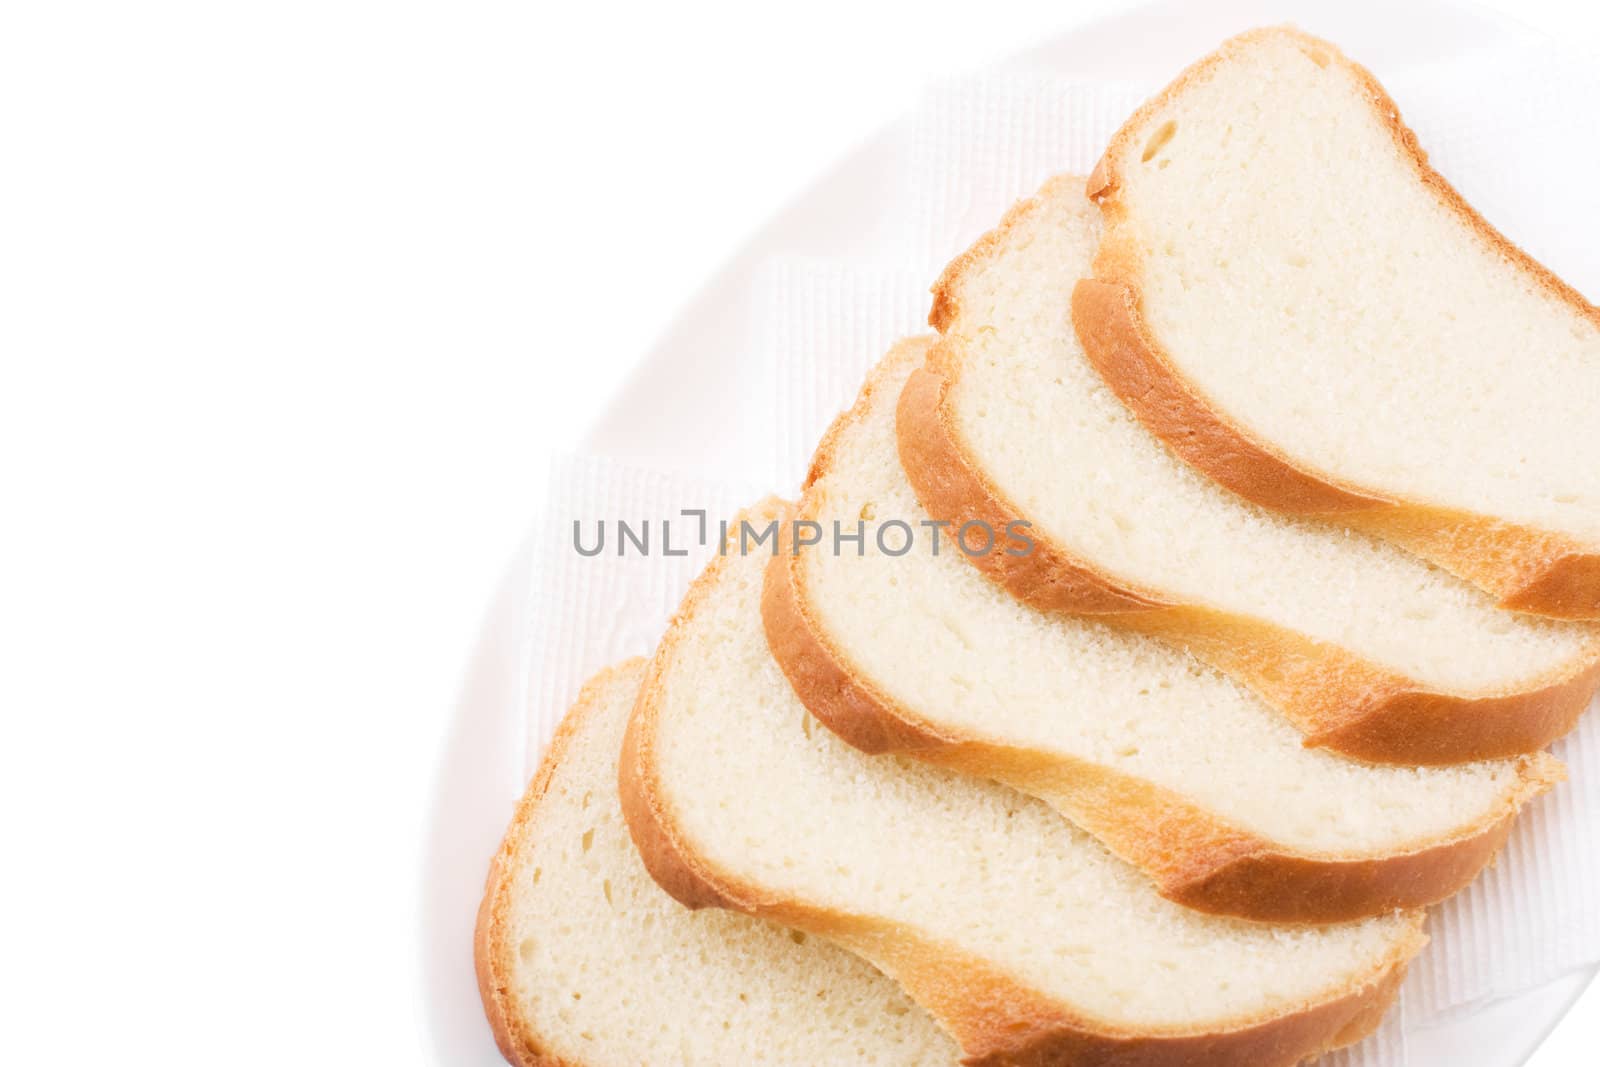 Sliced Bread on the plate isolated over white. Bon appetit!